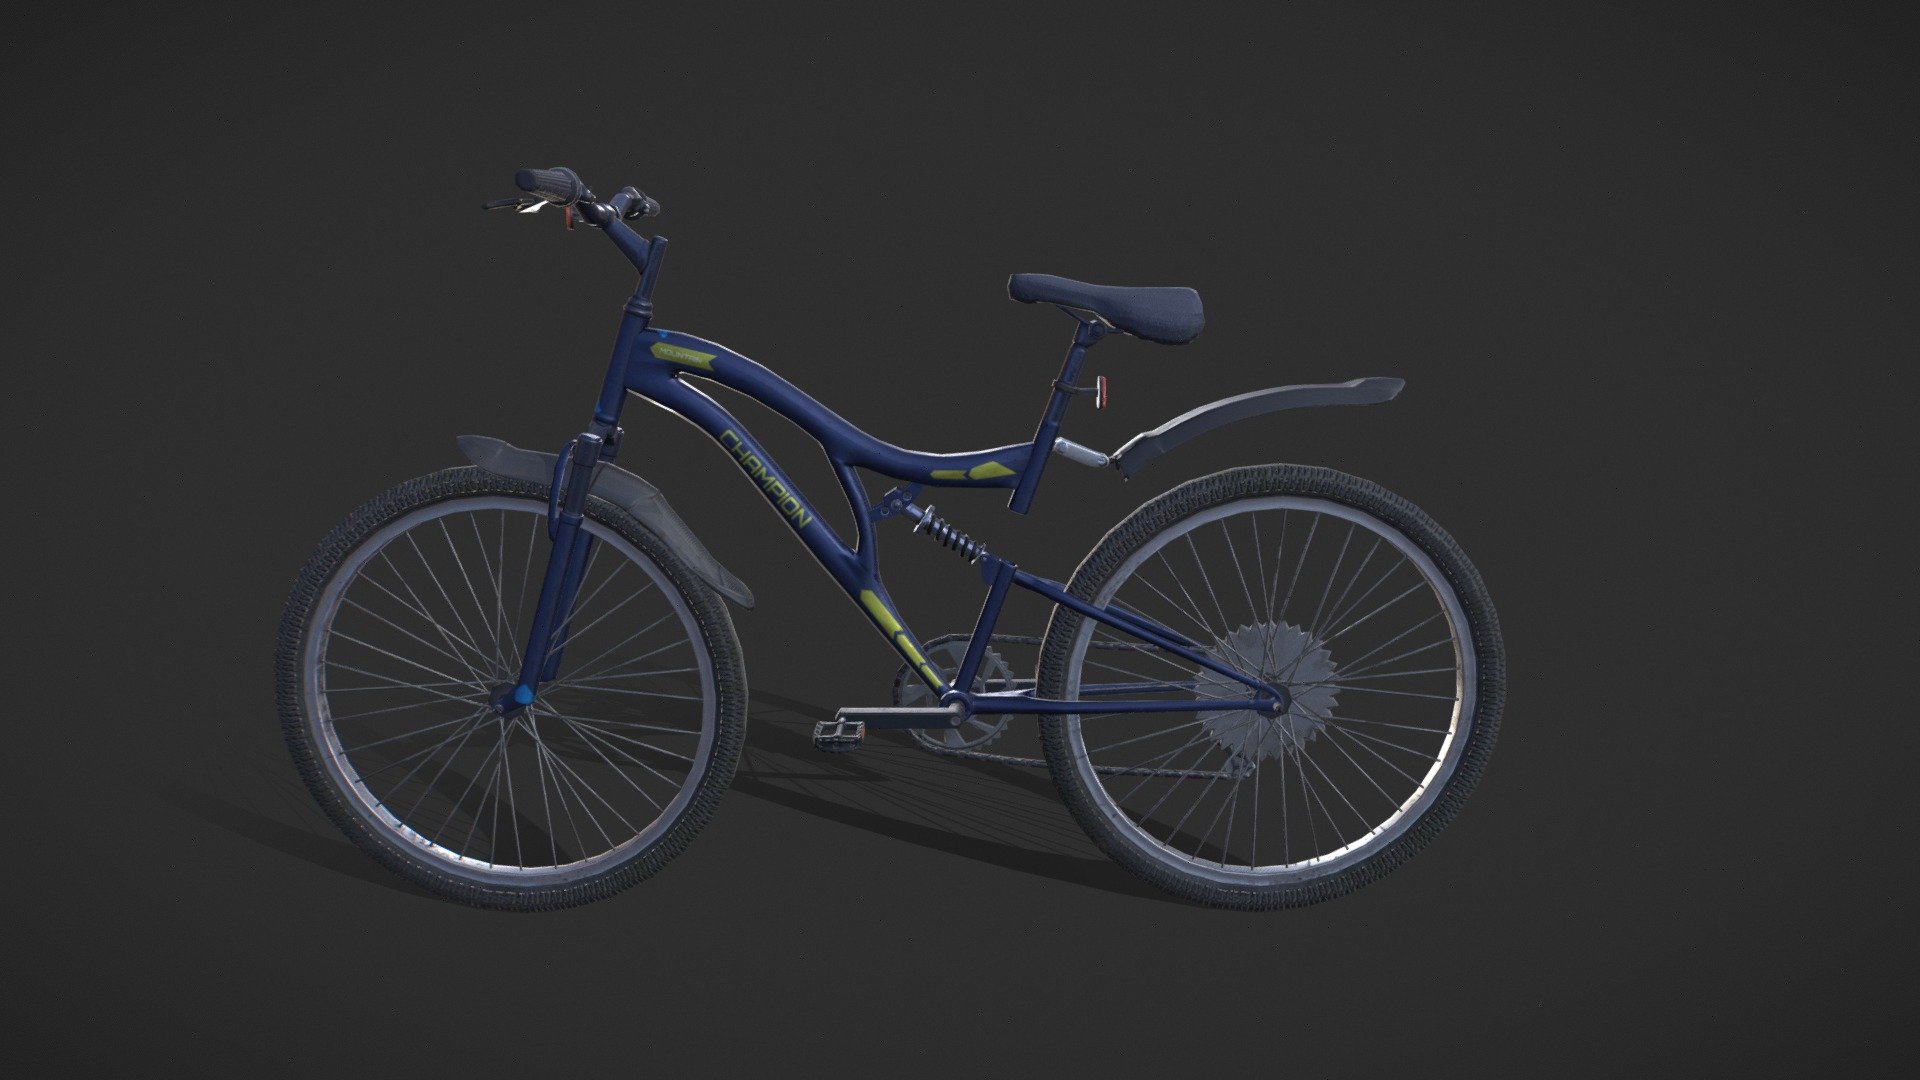 A lowpoly model of a mountain bike made in Blender and textured in Substance Painter. Asset contain 2 additional masks - one RGB mask for changing bike's frame color and one emission mask 3d model